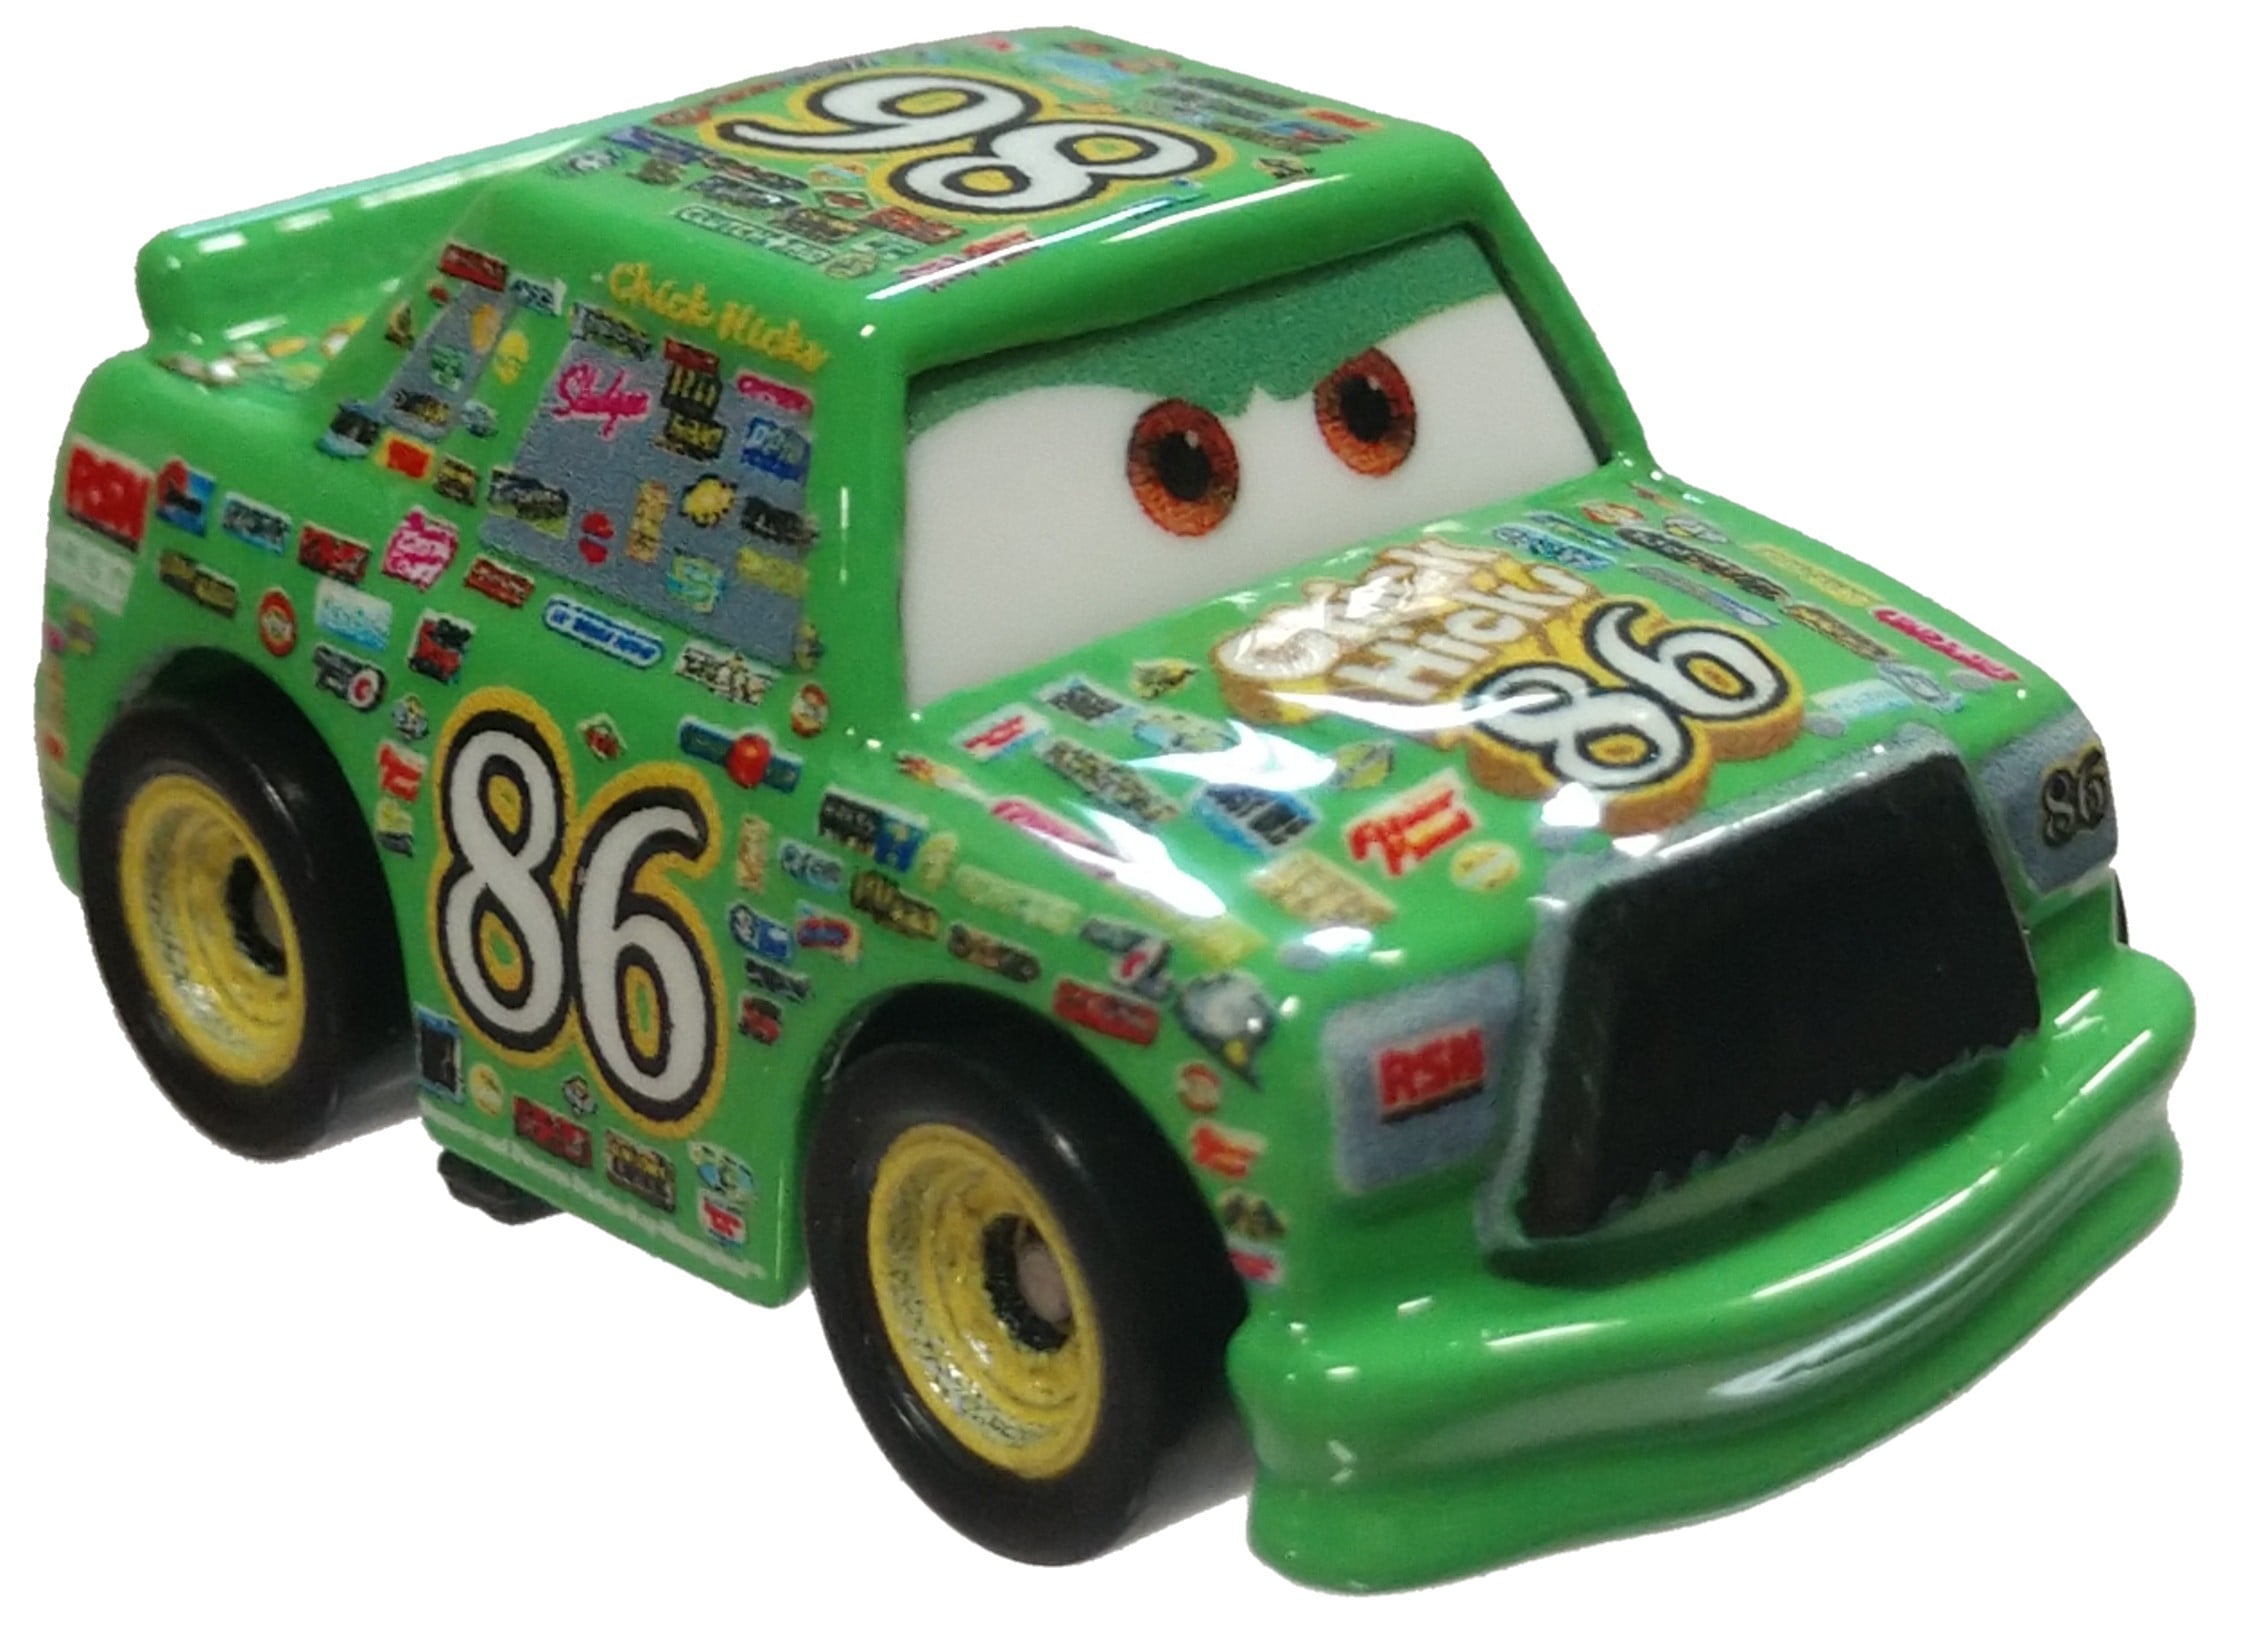 Disney Pixar Cars MINI ADVENTURES Dinoco Chick Hicks Without Store Package